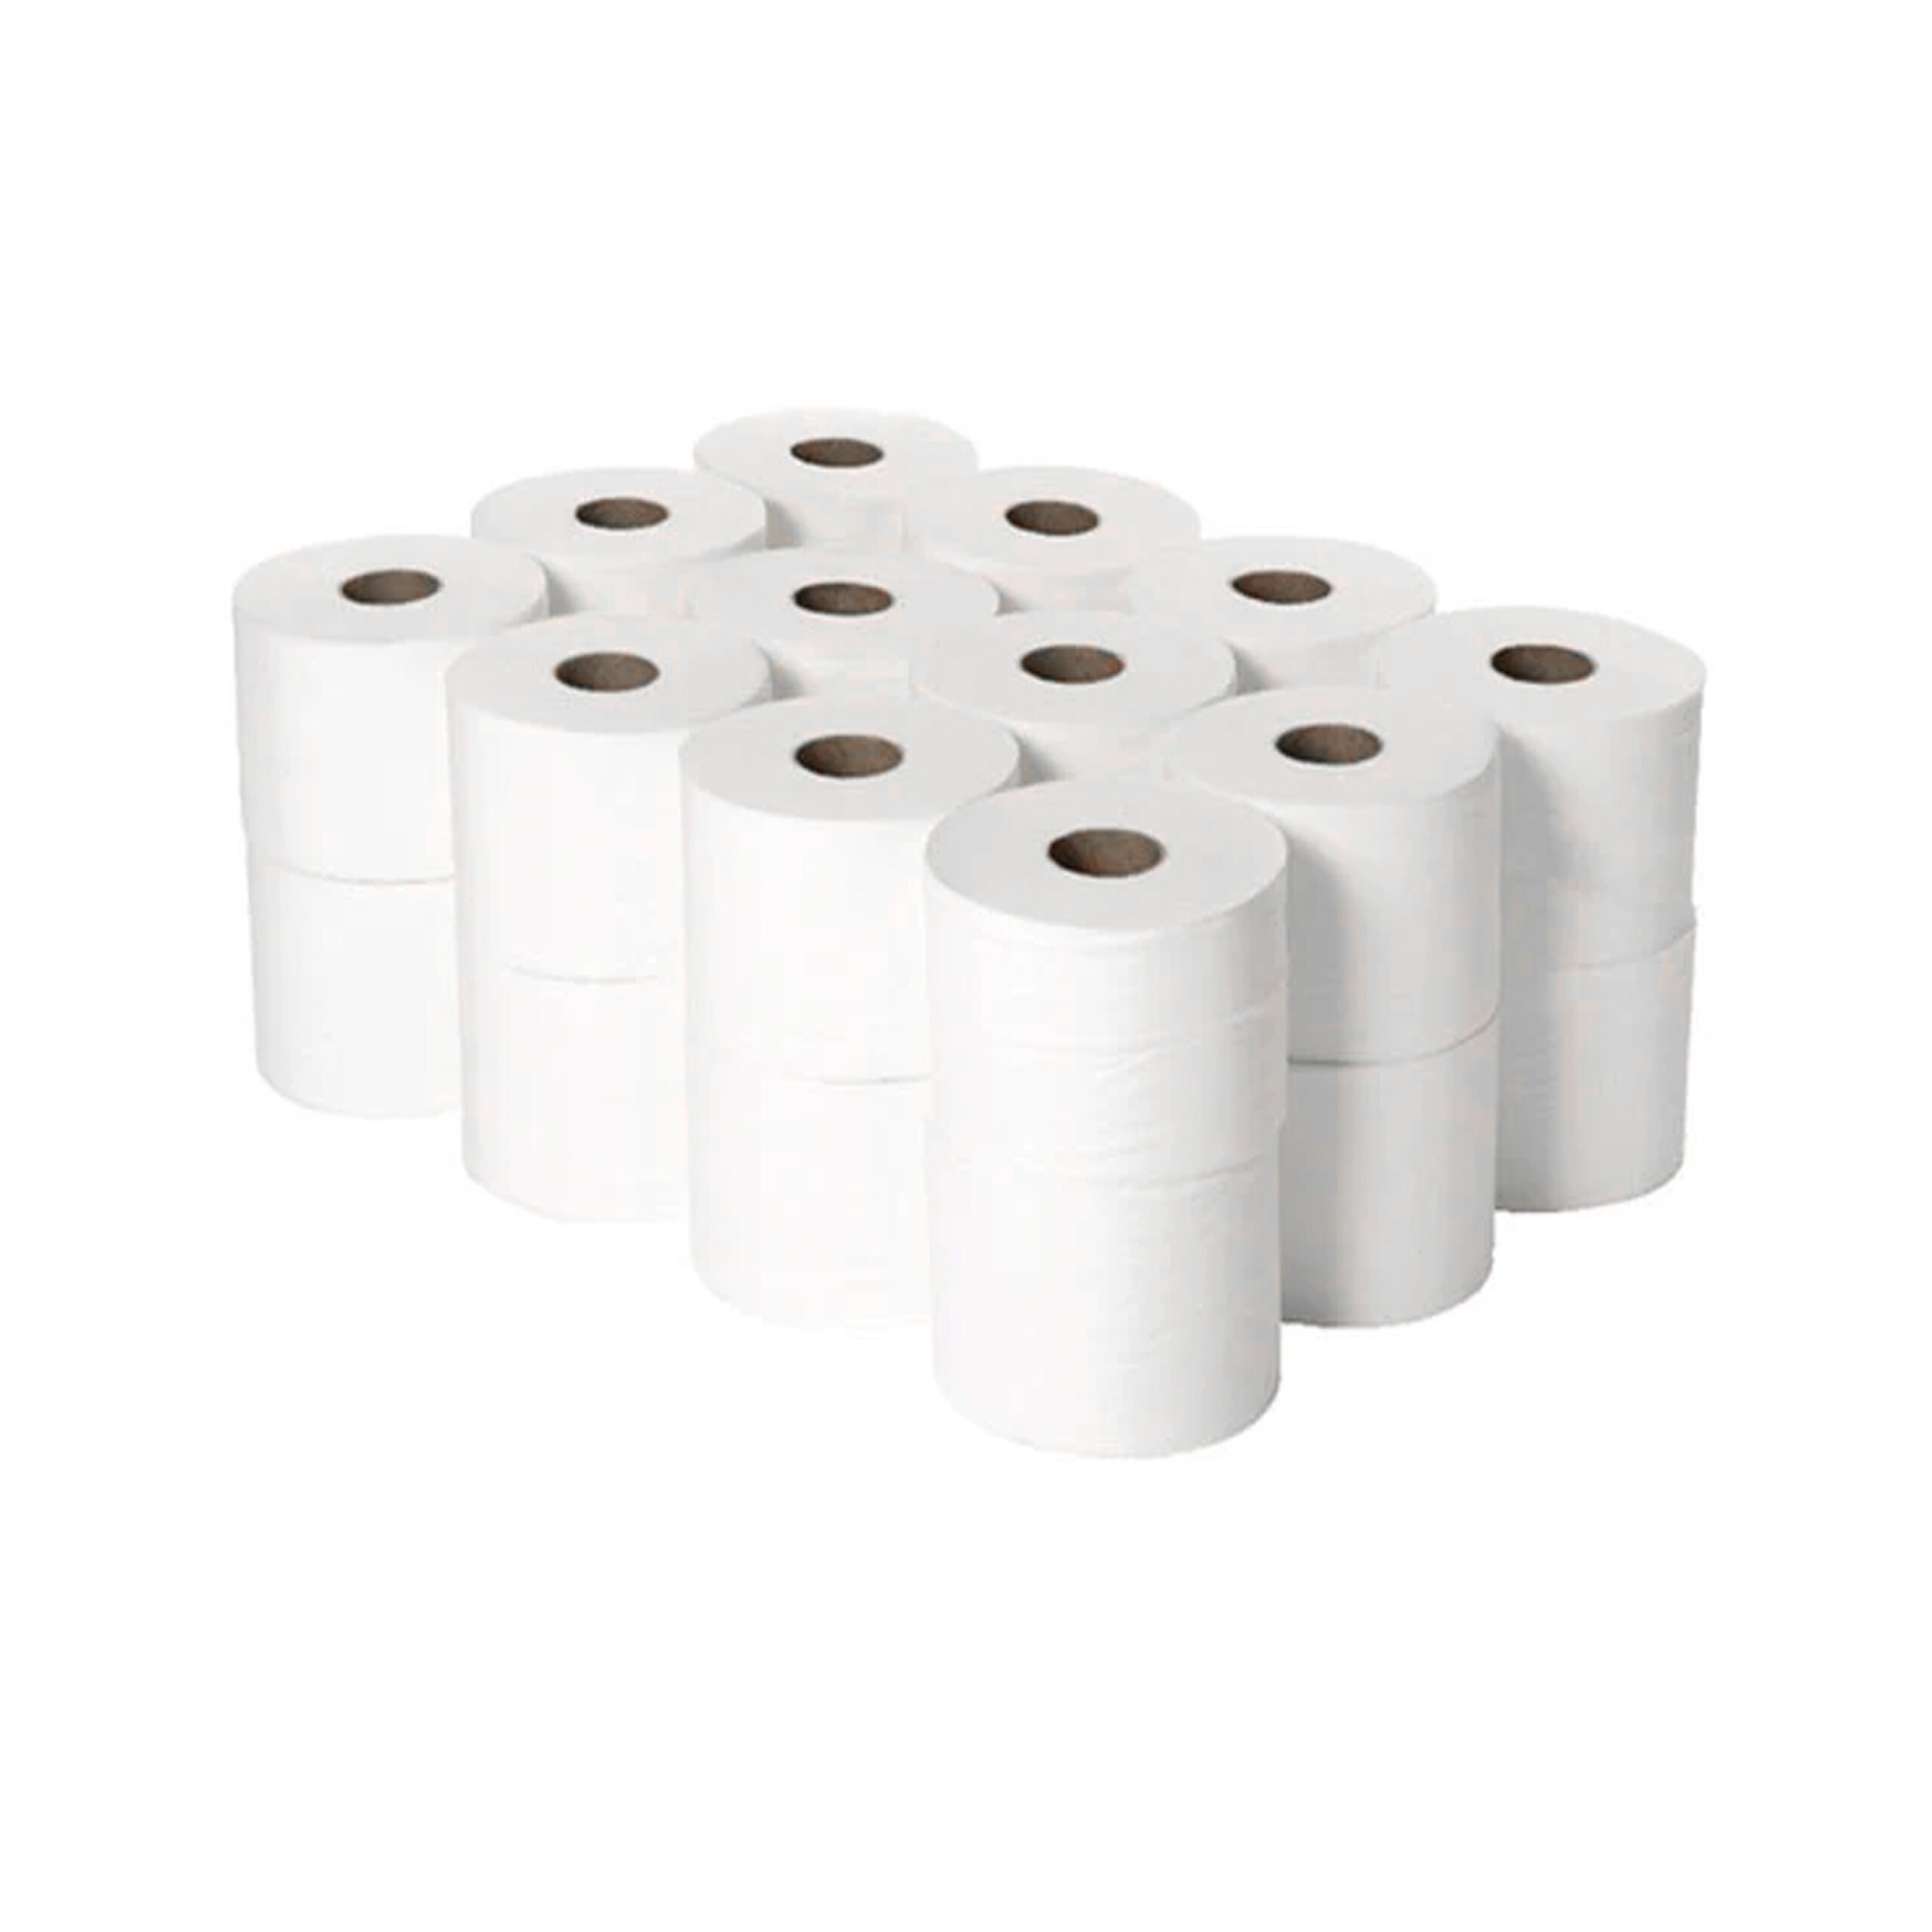 TOILET ROLL
VIRGIN
UNWRAPPED 390
SHEETS (1x40)